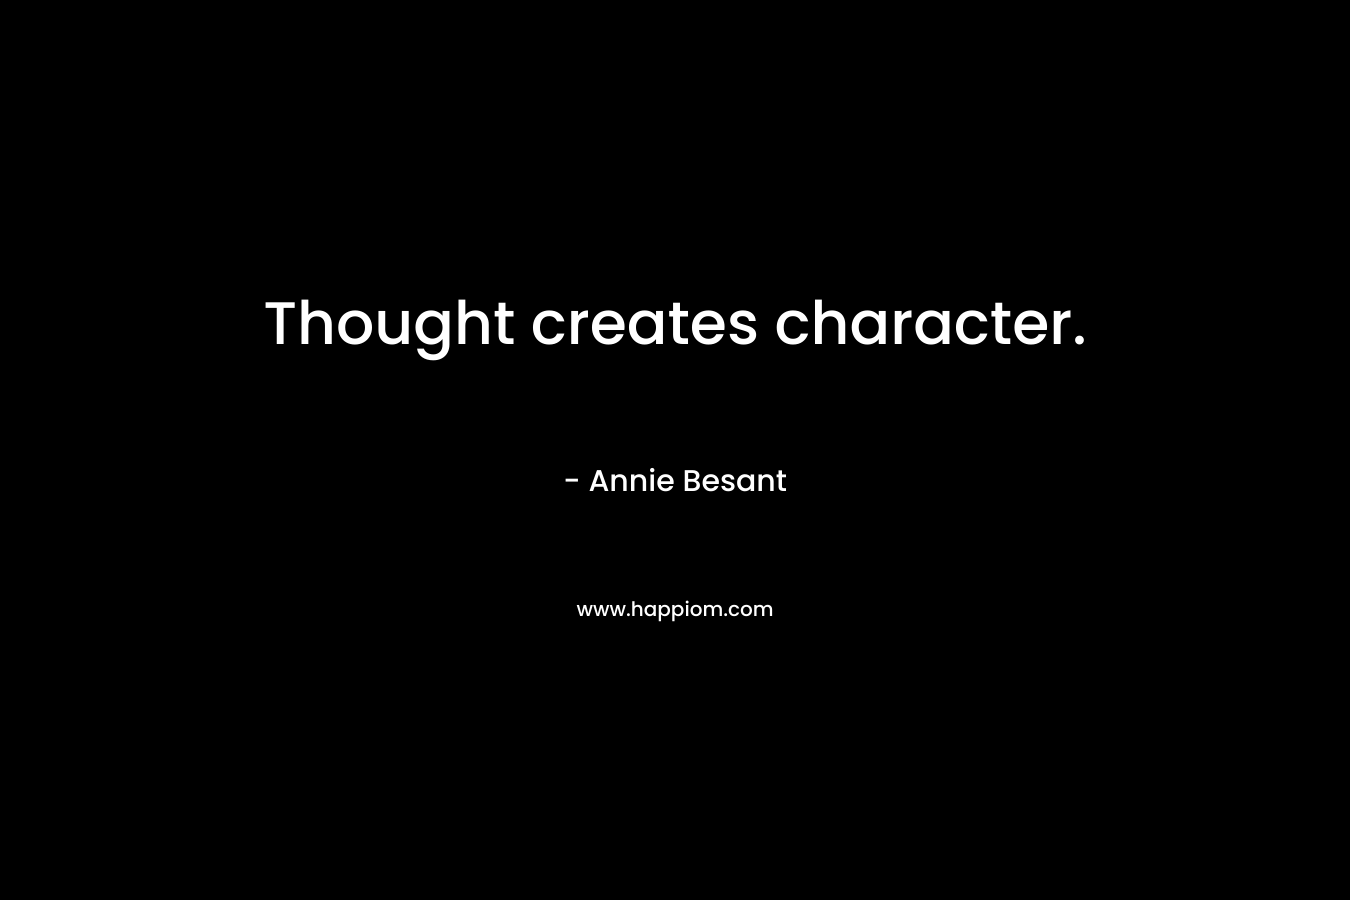 Thought creates character.